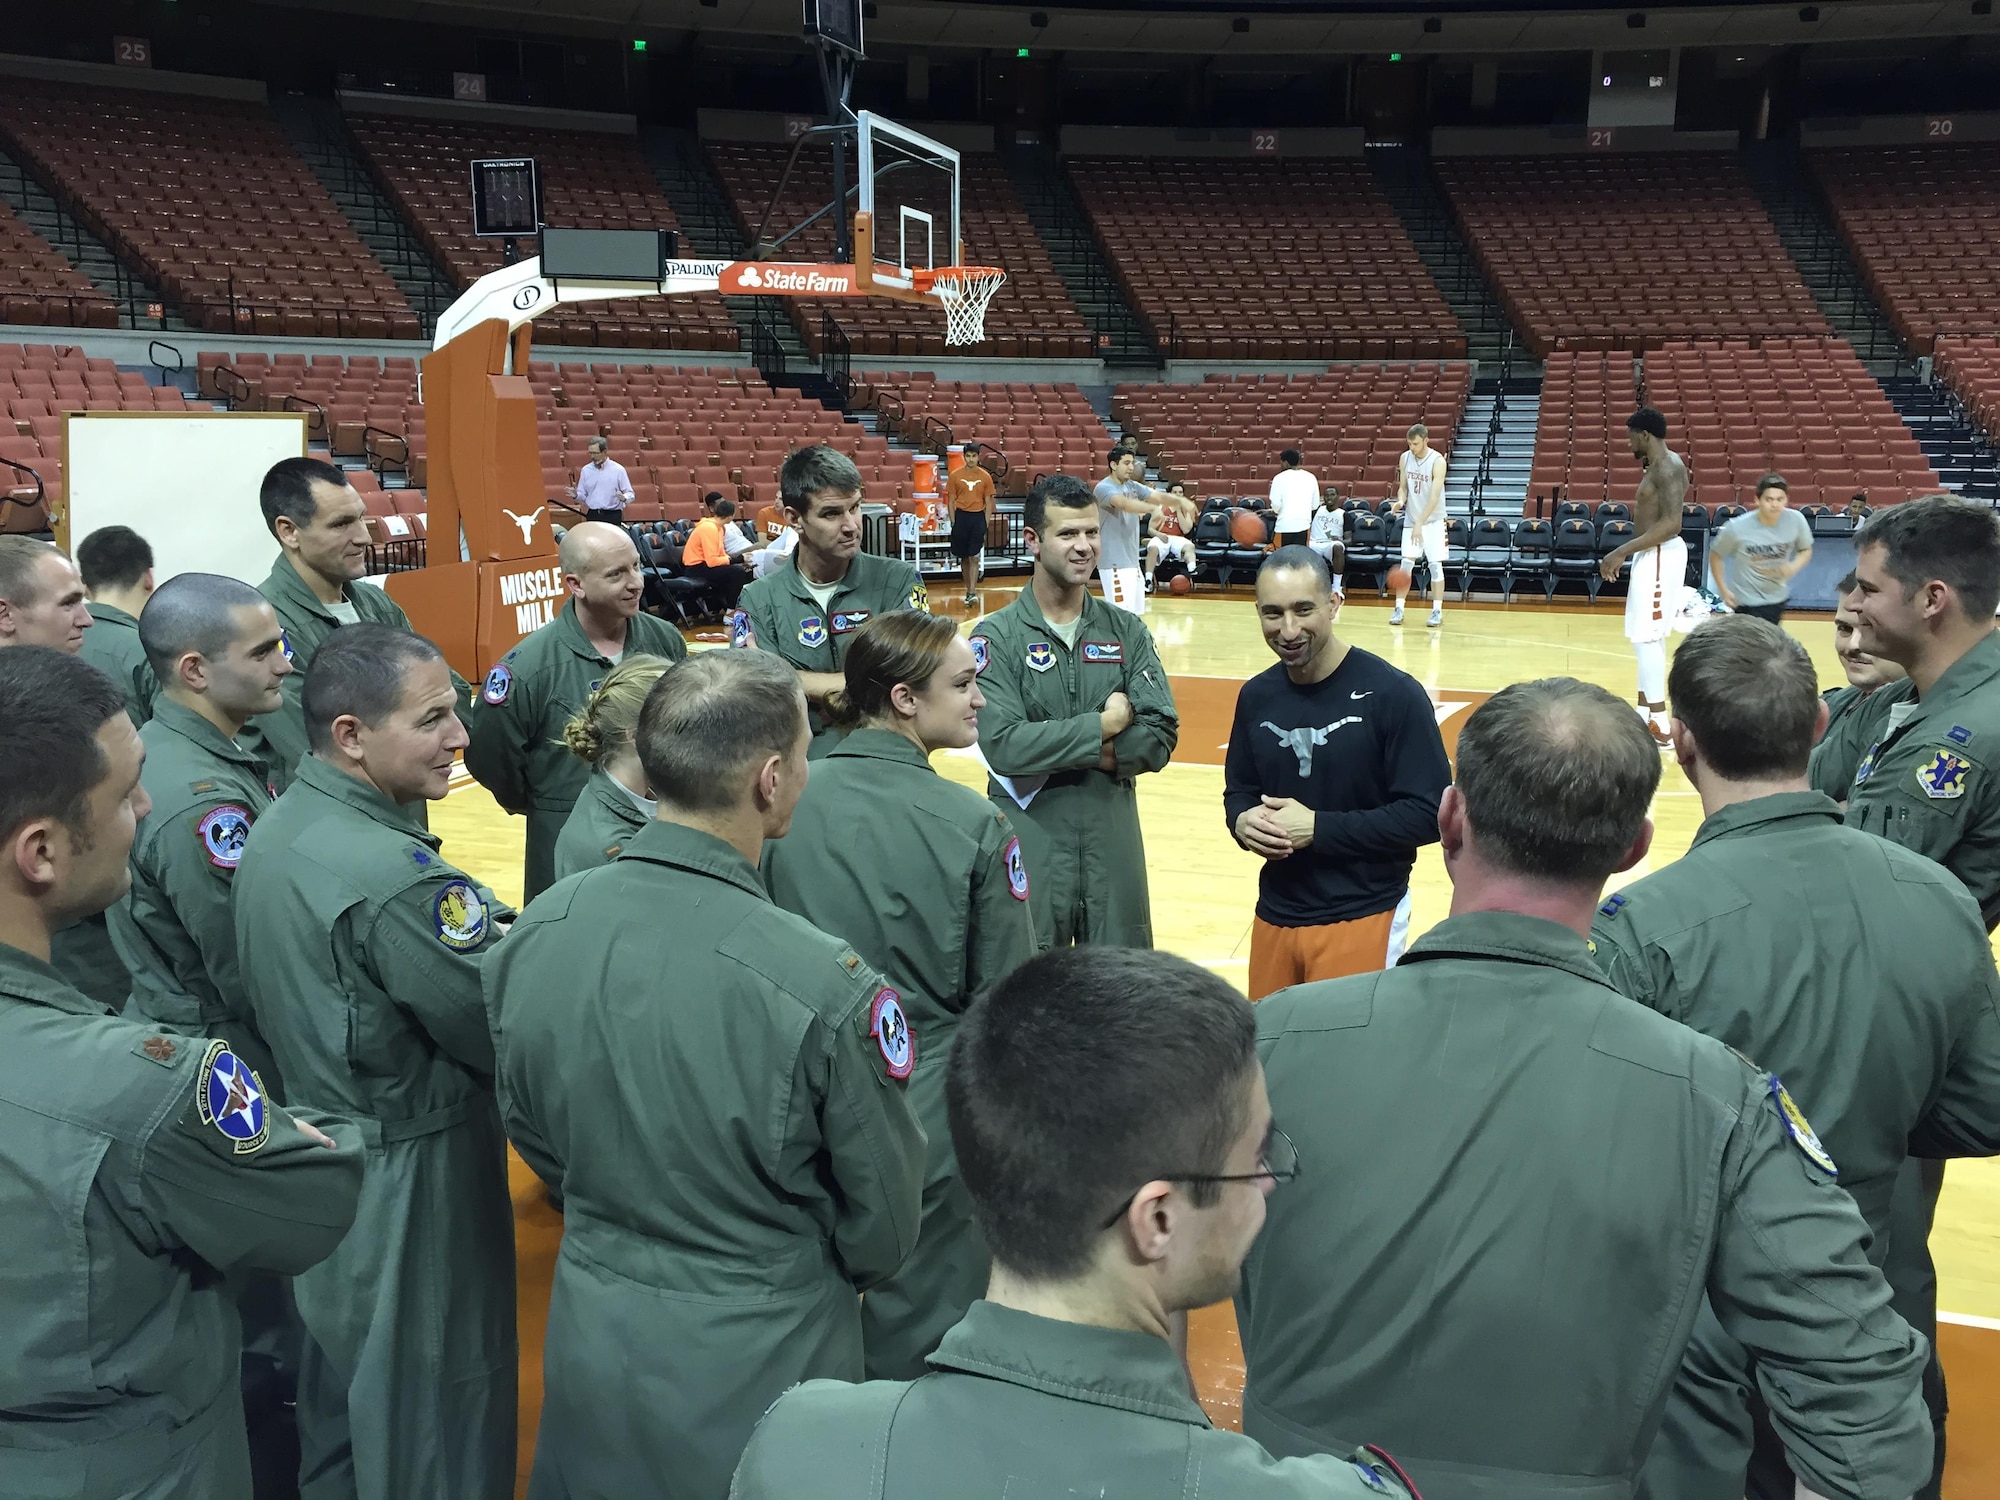 6 of 7
Members of the 435th Fighter Training Squadron engage in a full-court discussion with Shaka Smart, head coach of the University of Texas men’s basketball team Nov. 19, 2015, at the Frank Erwin Center in Austin, Texas. The Deadly Black Eagles met with the coach to discuss building relationships within a team and leadership philosophies. (Courtesy photo)
